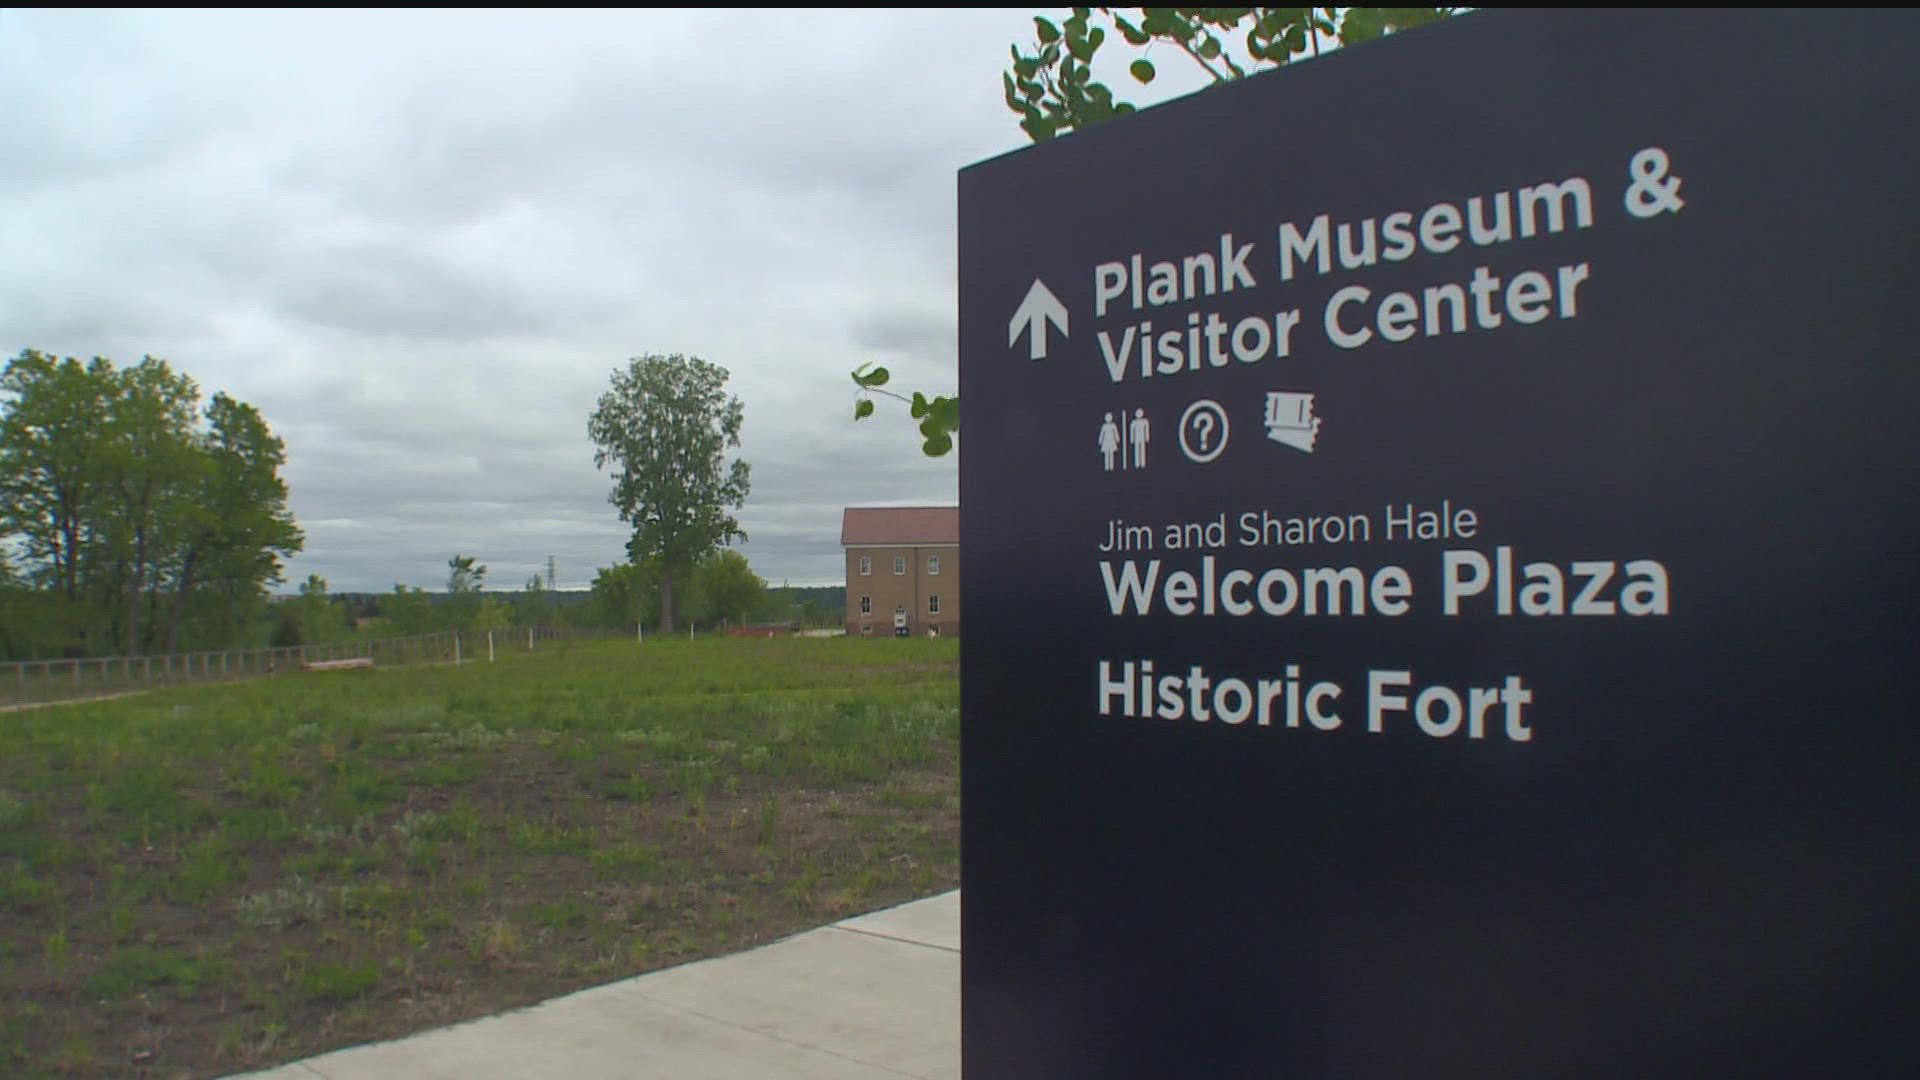 Historic Fort Snelling reopens to the public Saturday, May 28 after more than two years of rehabilitation and improvements.